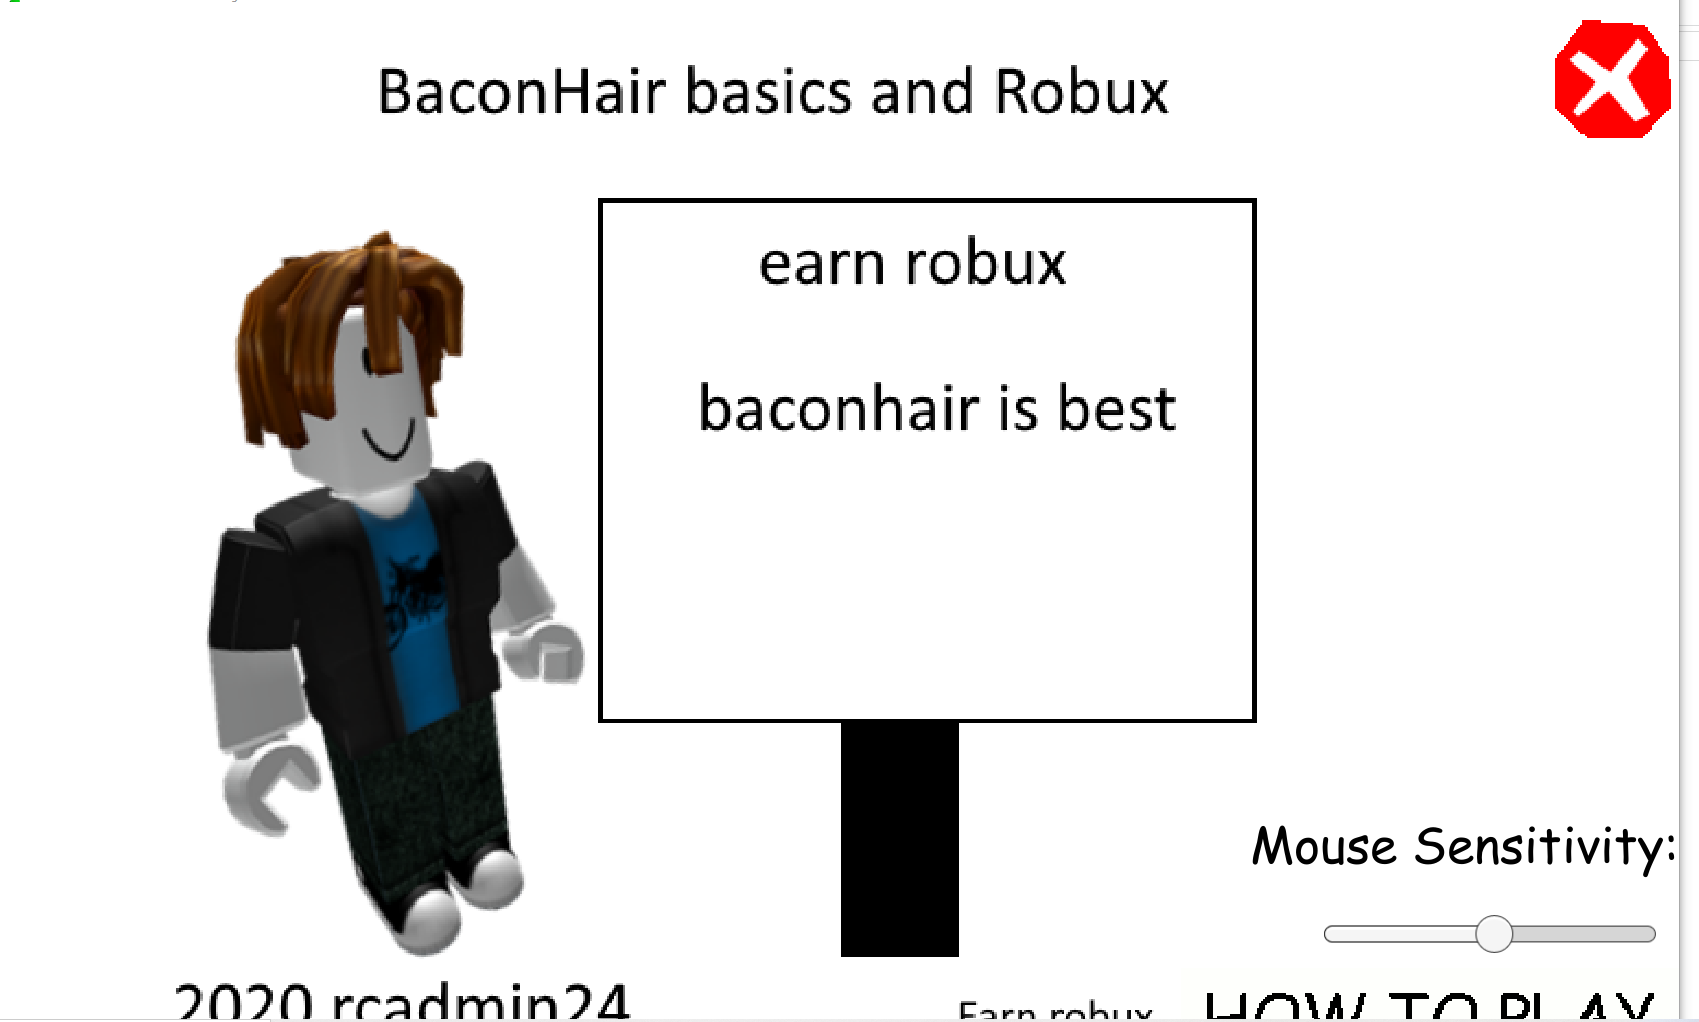 Baconhair Basics And Robux By Adminer24 - io robux